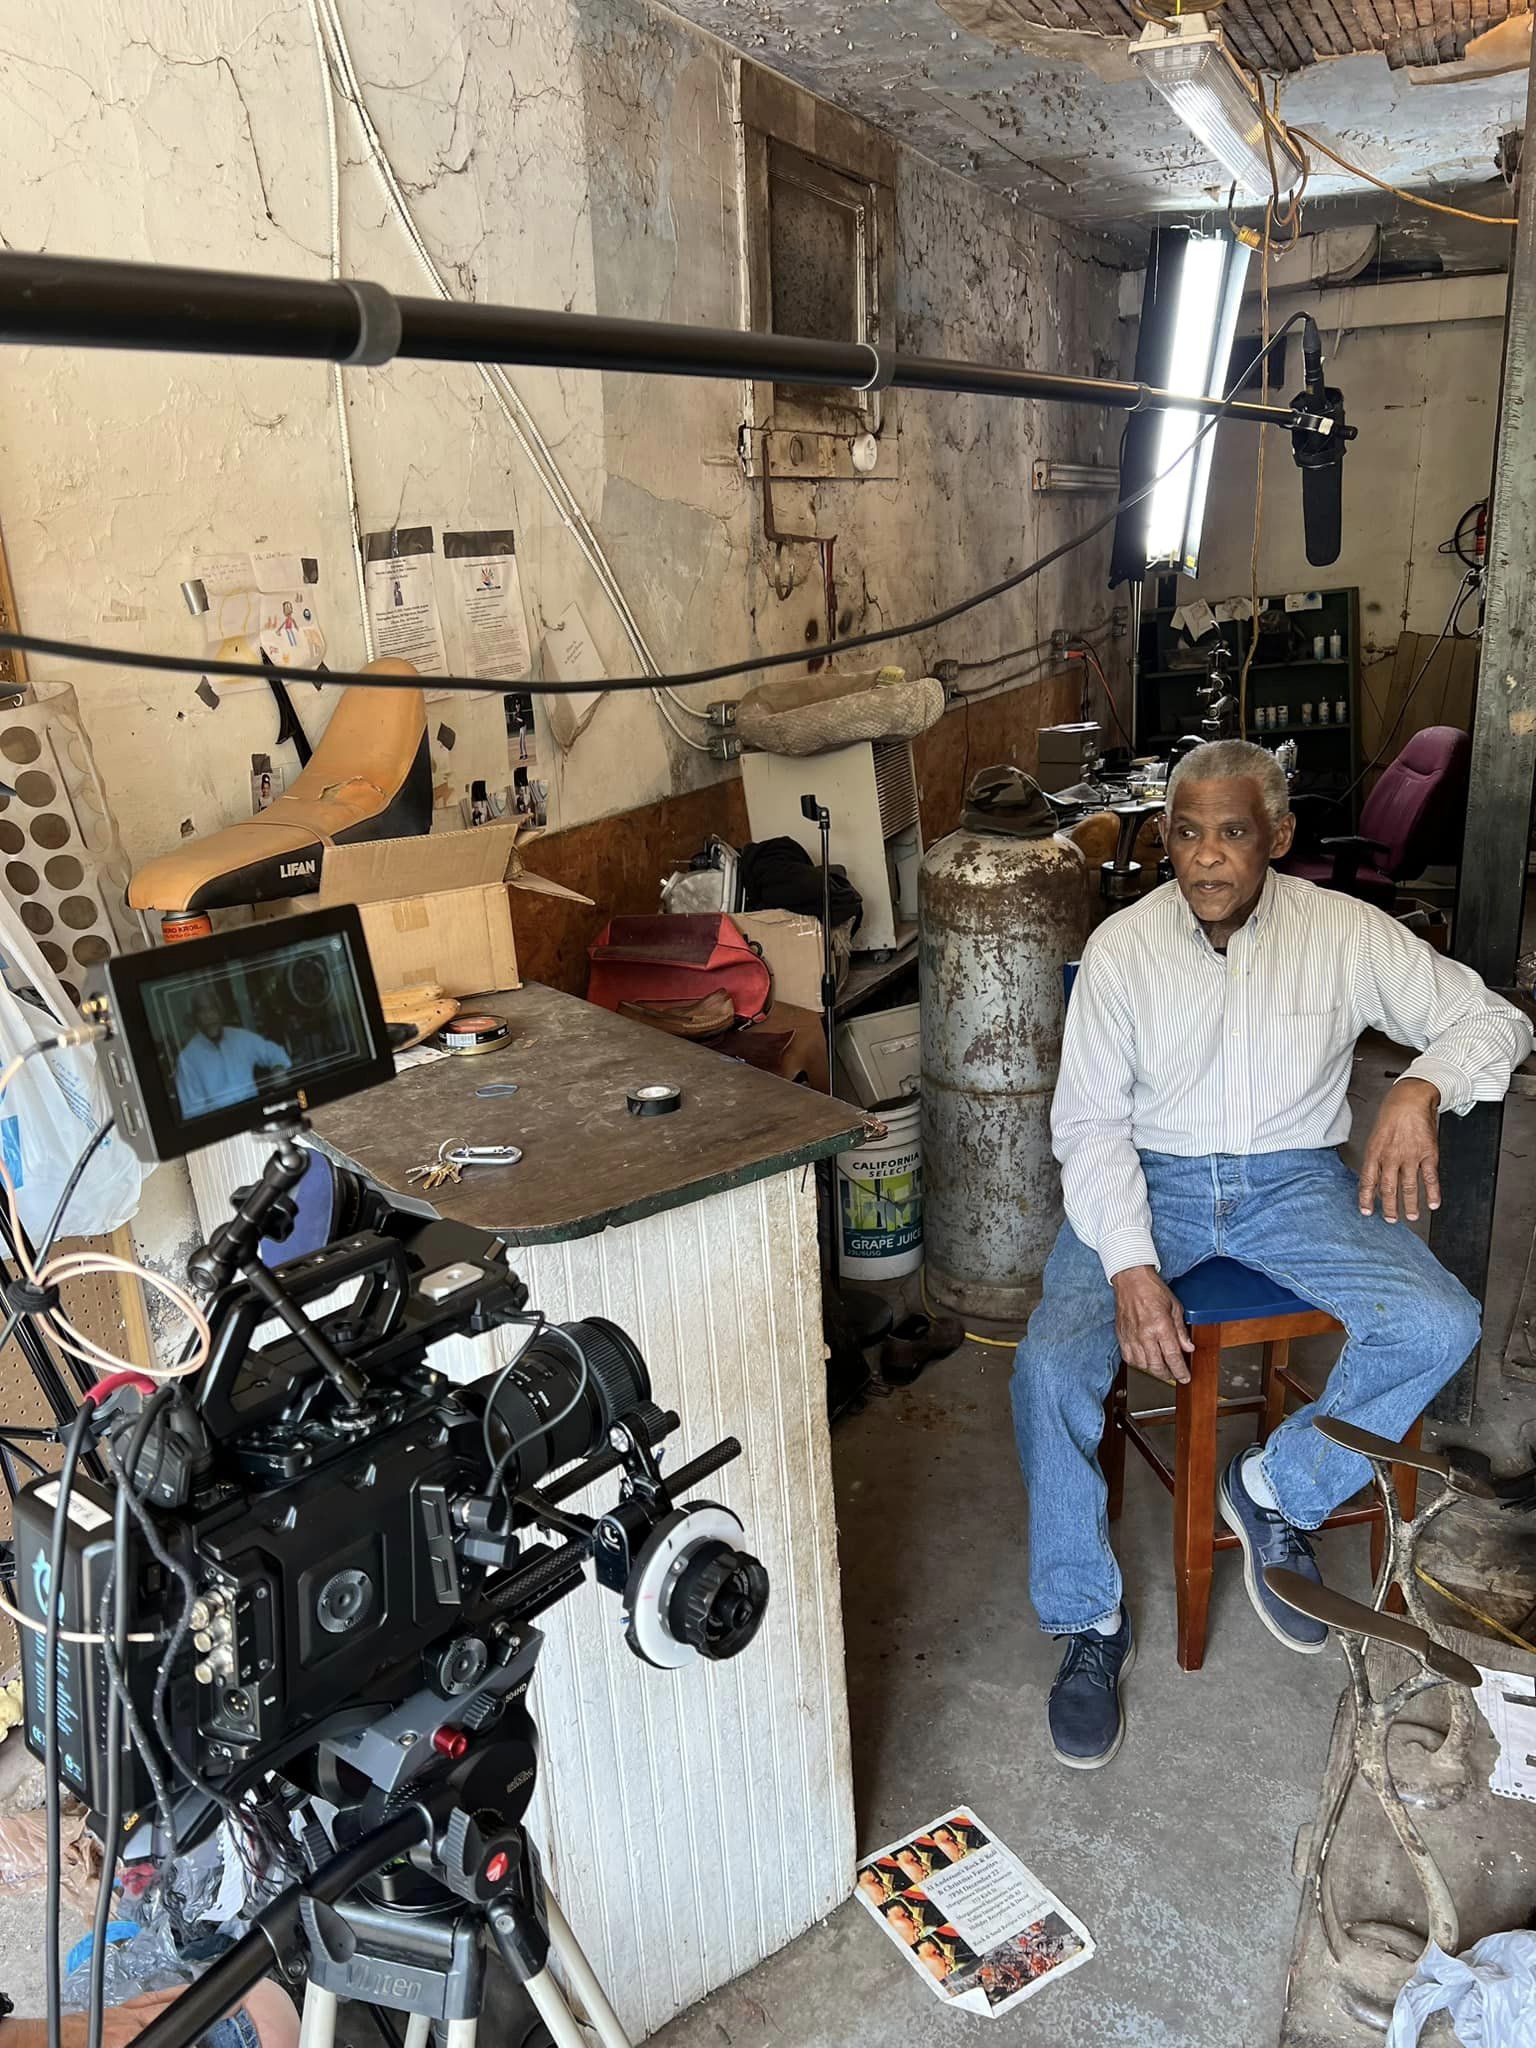 A man sits in a concrete room with a camera and laptop recording equipment in front of him.